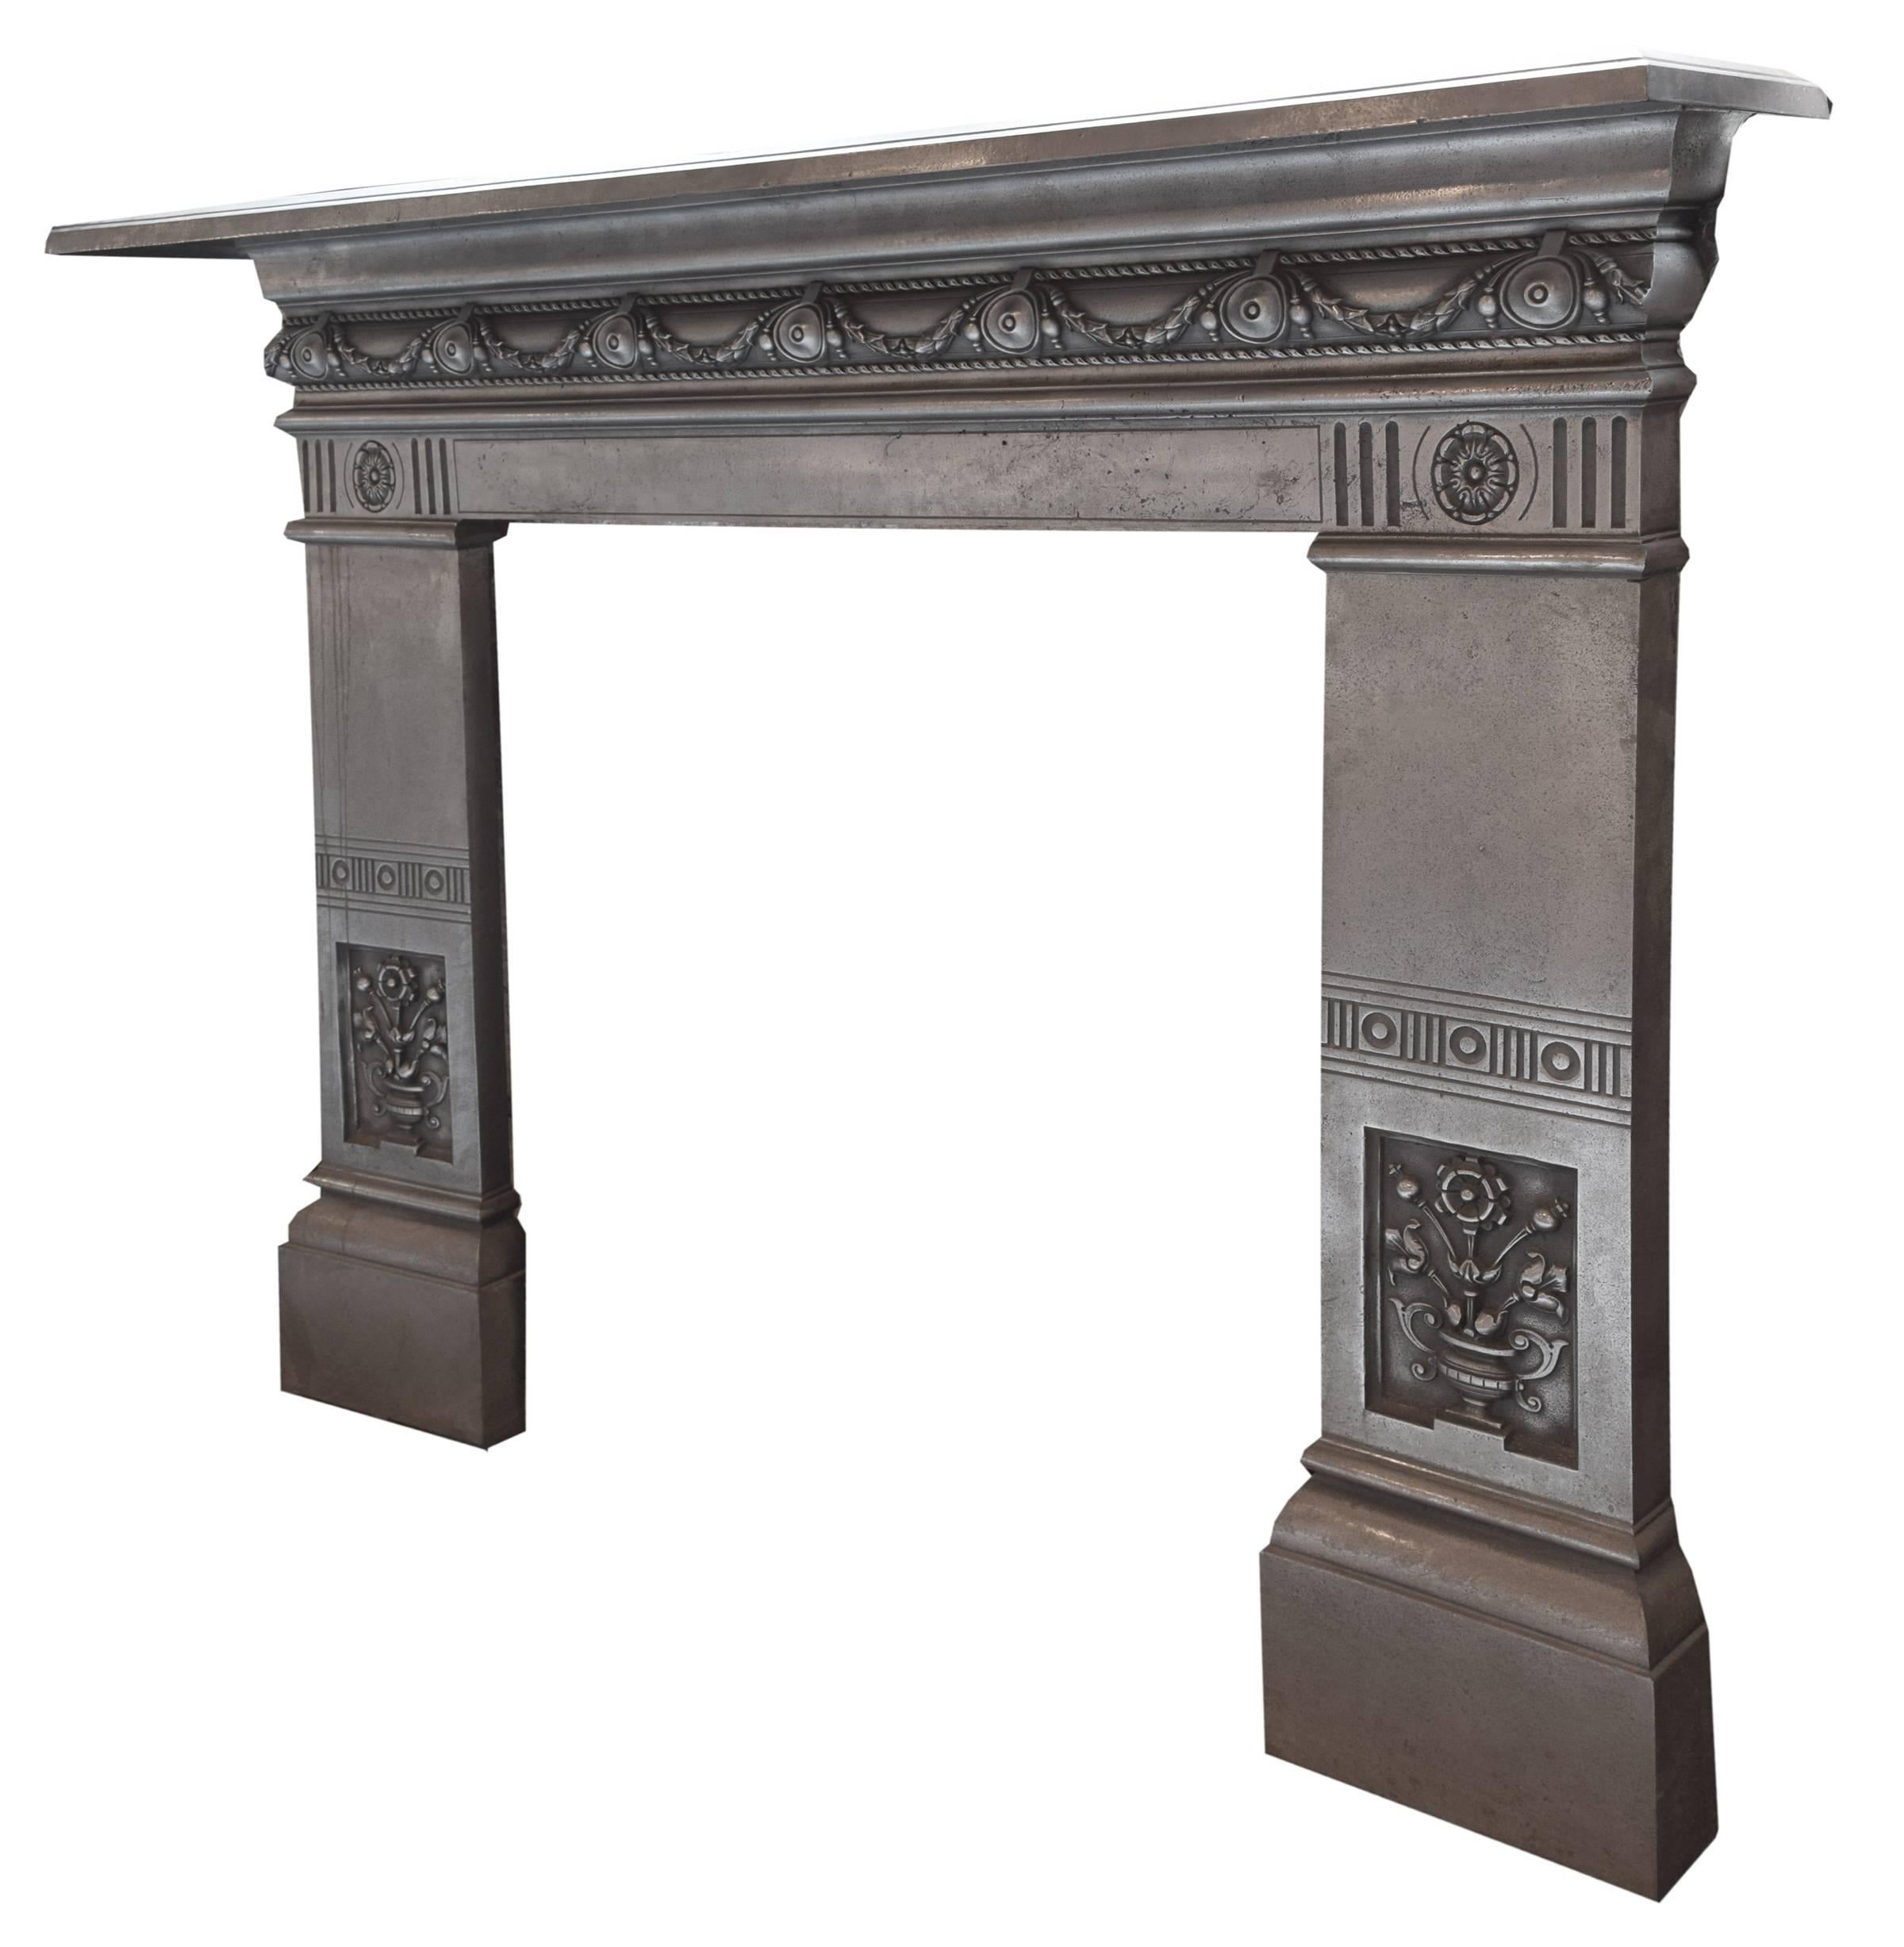 A late 19th century English cast iron fireplace surround with floral swags across the apron and potted flowers on each leg.

Interior dimensions:
35.5